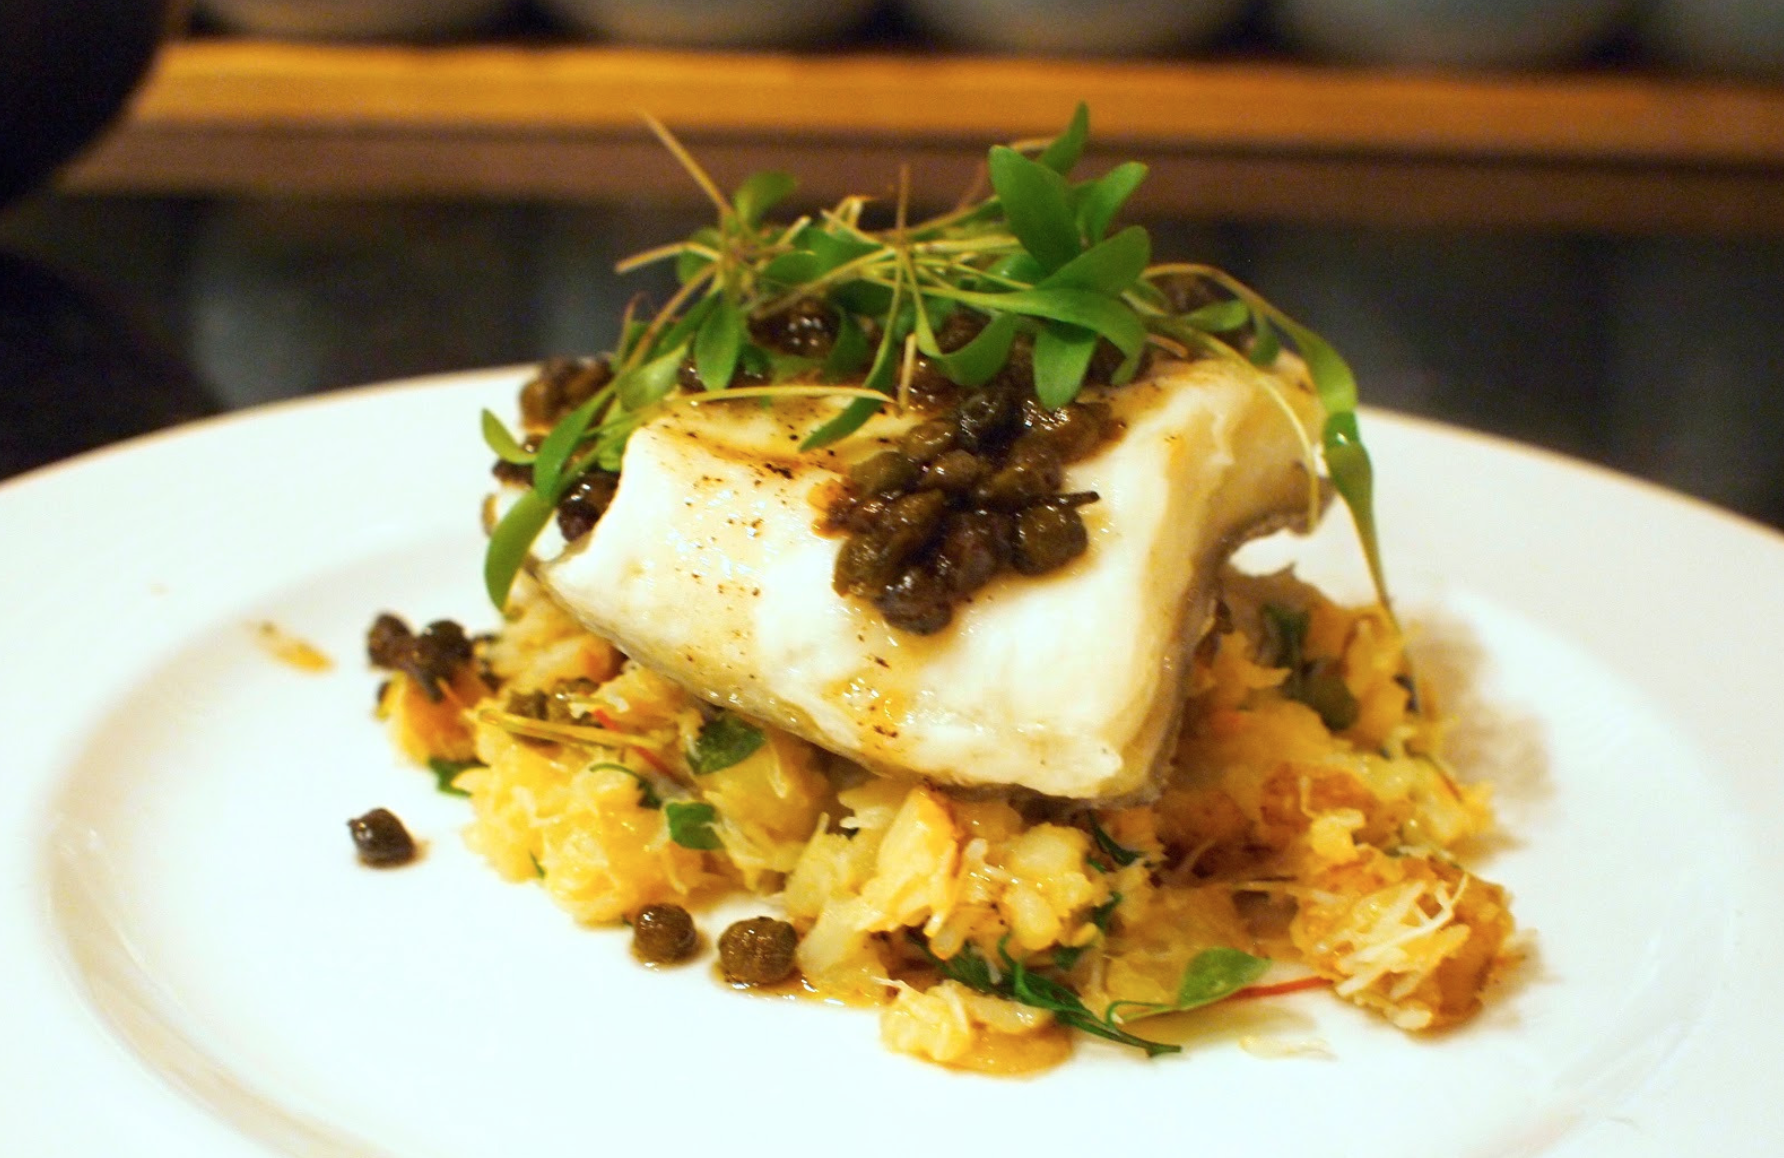 Steamed turbot, crushed potatoes with crab, and buerre noisette…